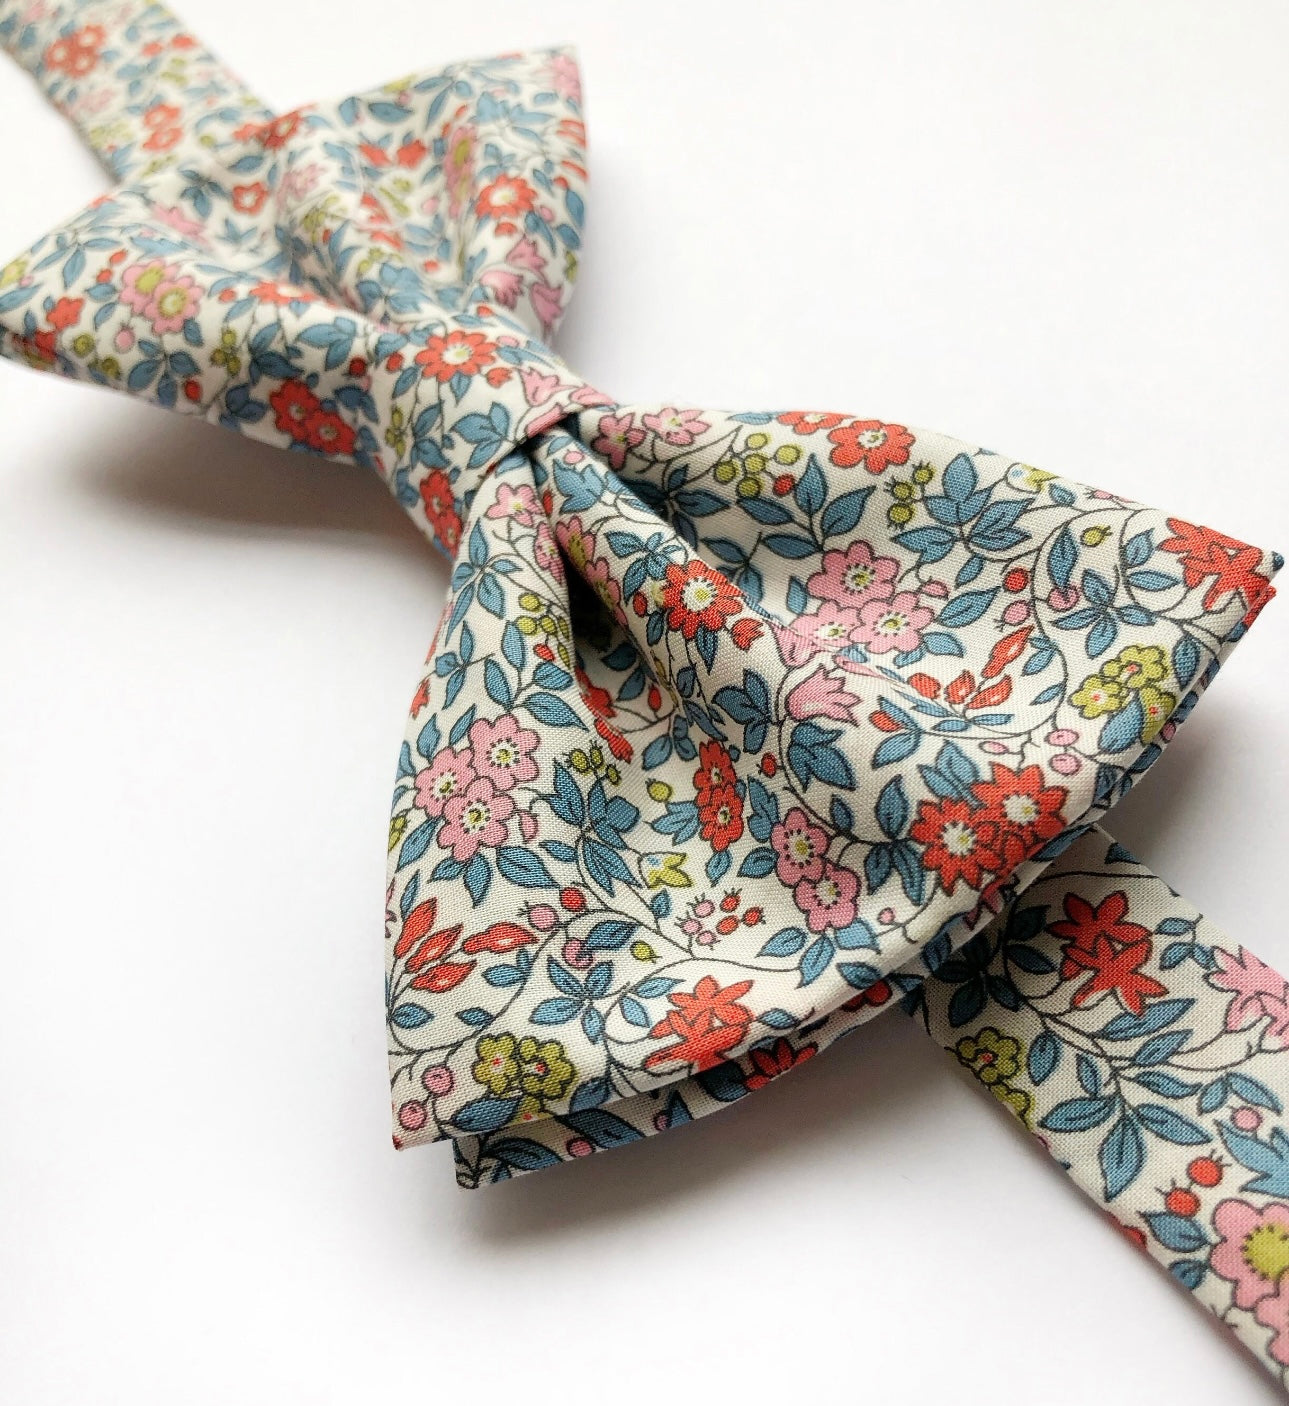 Bow Tie in Blue & Red Floral